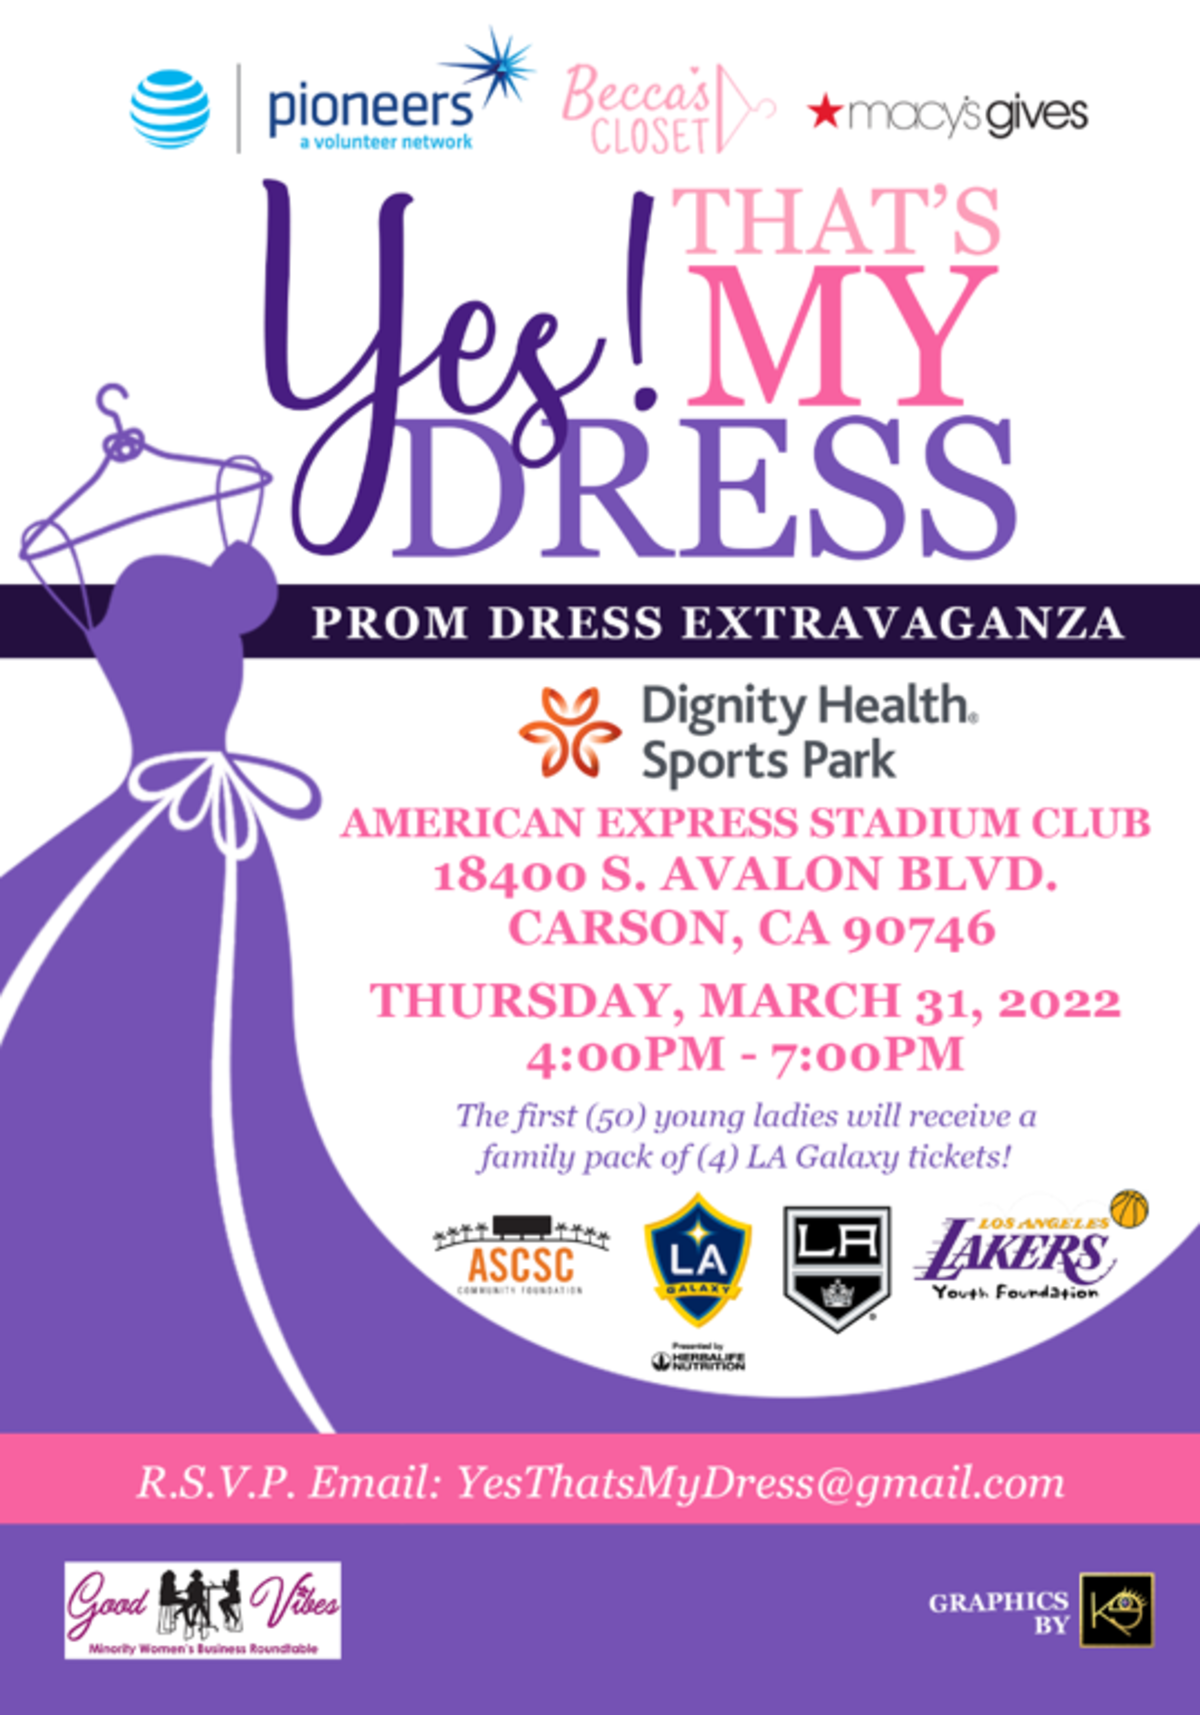 Underprivilege junior and senior high school students found their special prom dresses during the “Yes! That’s My Dress” pop up event at AEG's Dignity Health Sports Park in Carson, CA